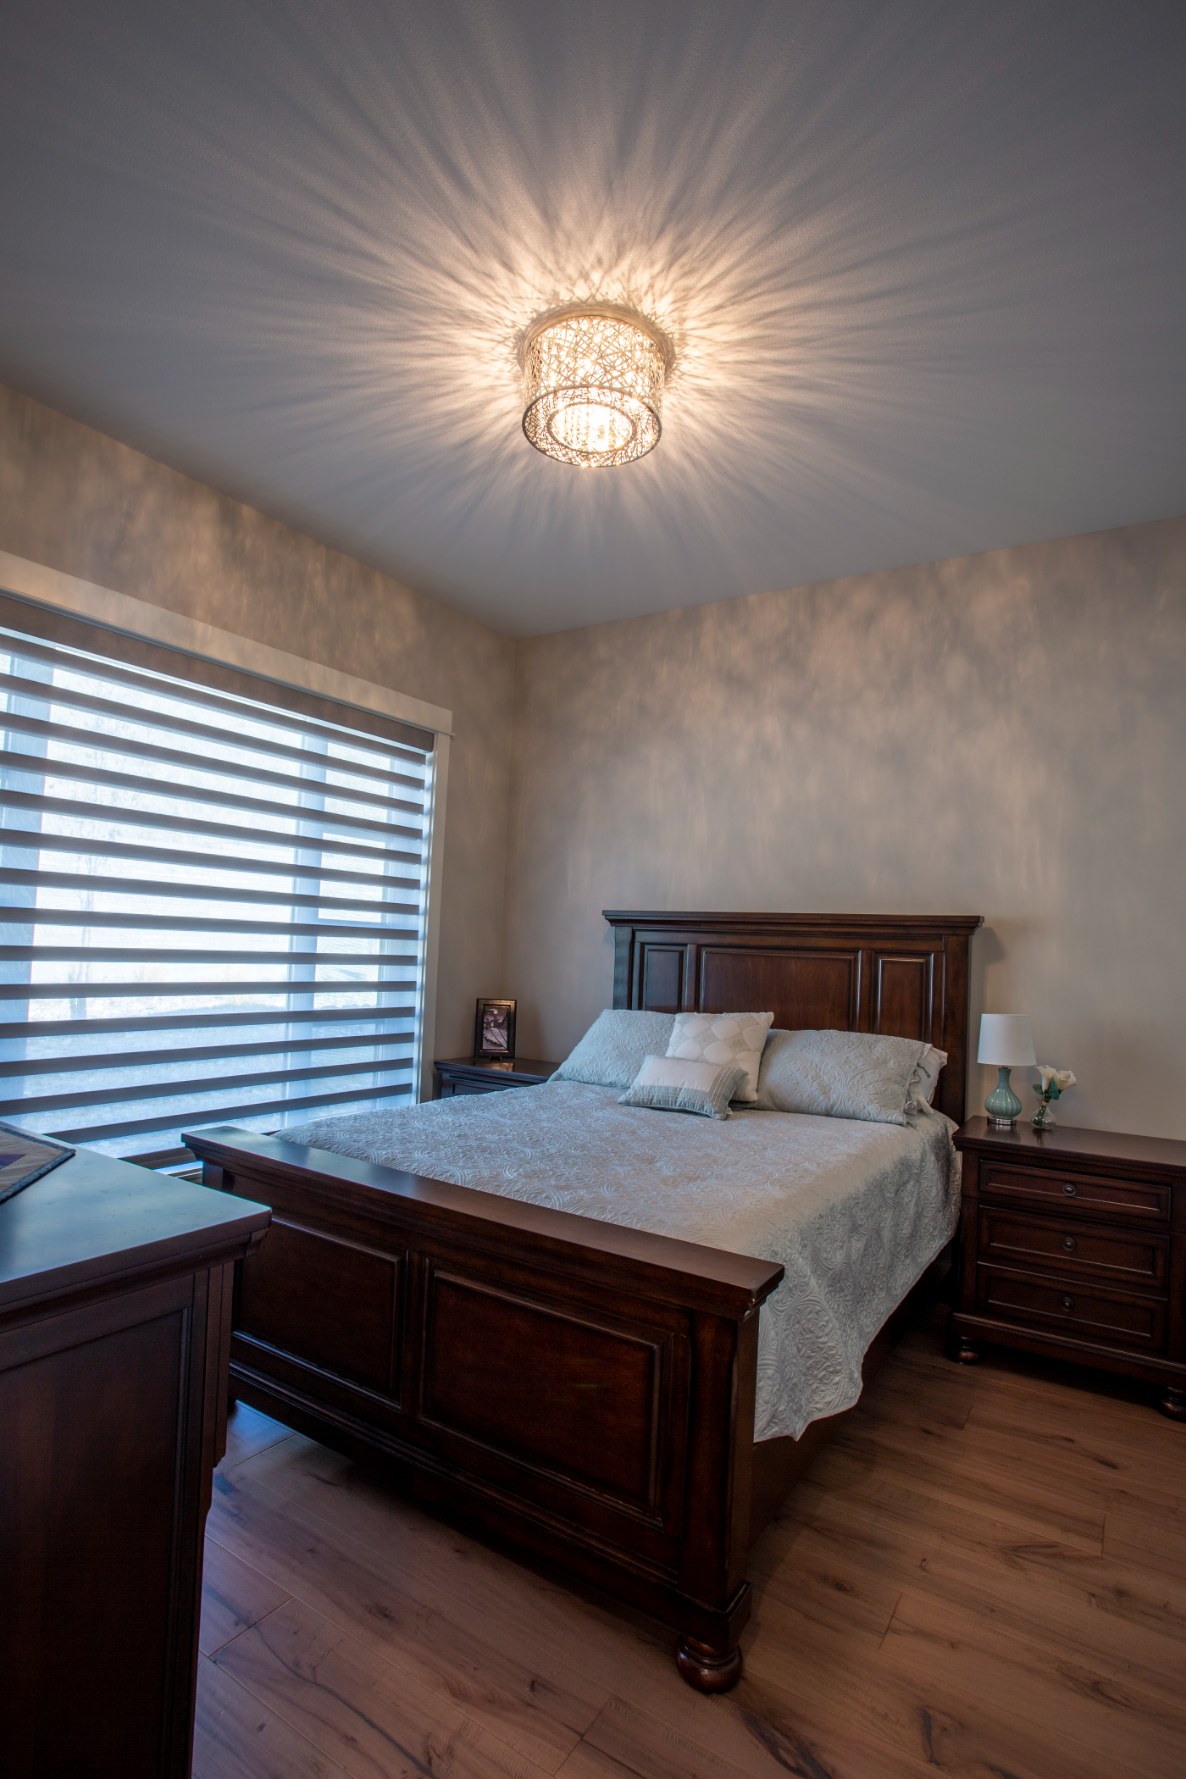 Photo of spare bedroom with overhead crystal light fixture.